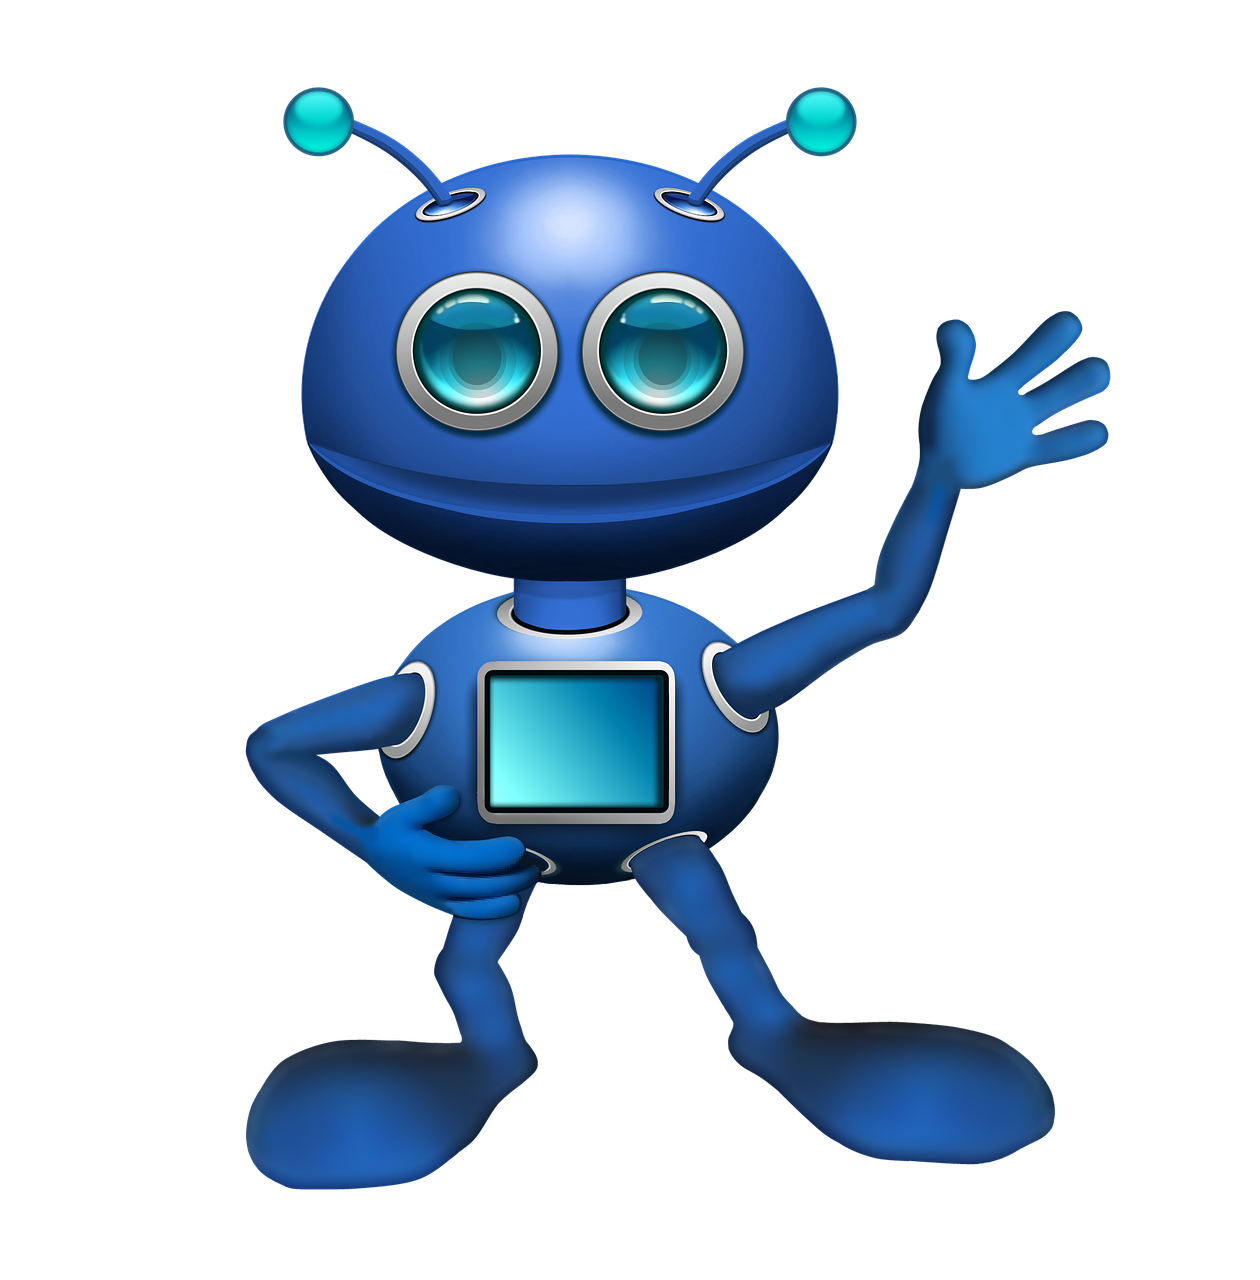 Smiling robot as illustration for AI risks by MIM326 from Pixabay